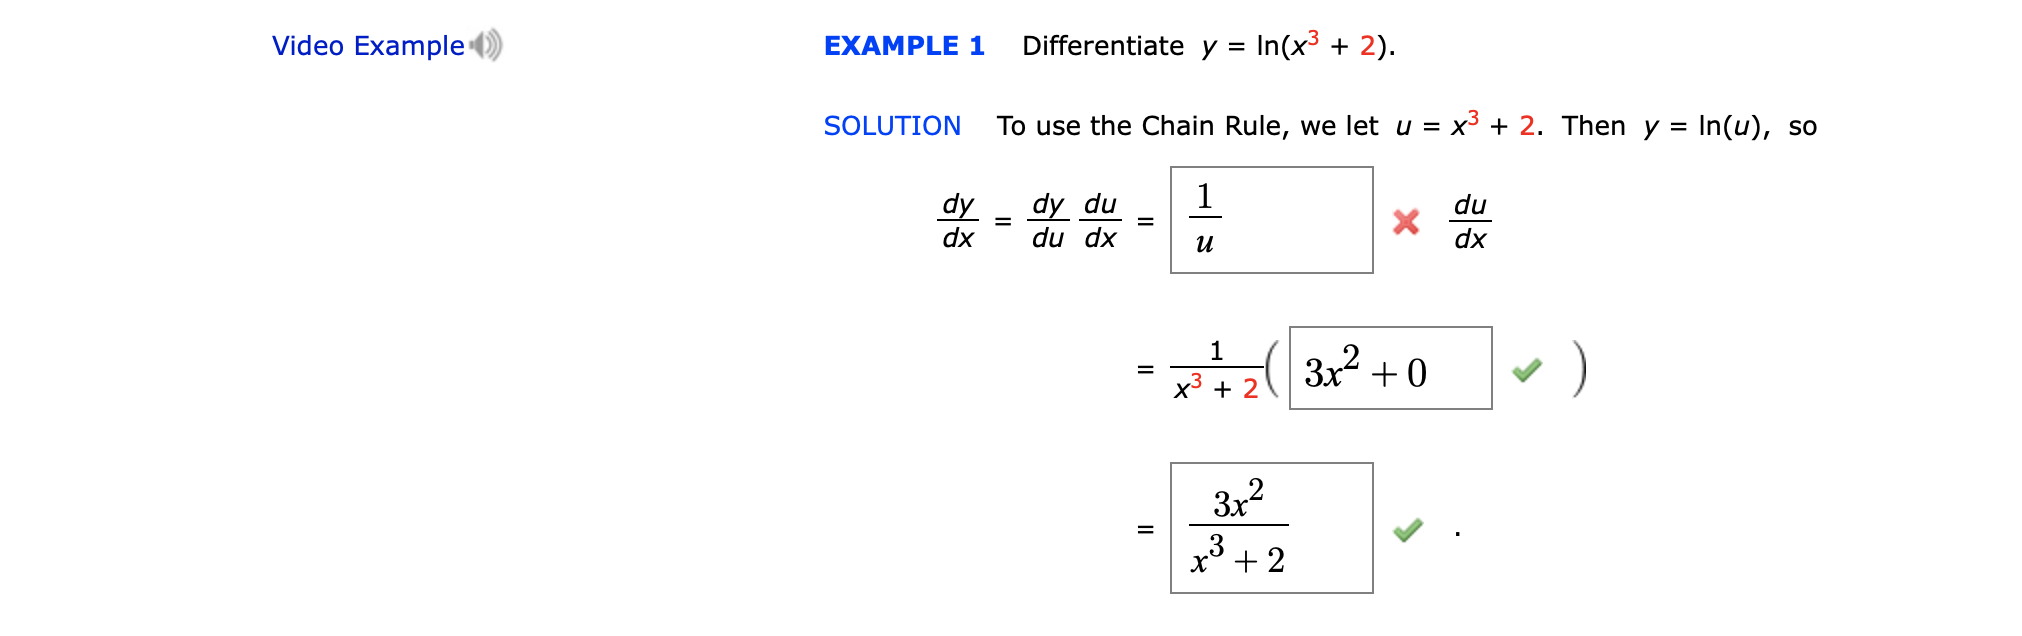 Video Example
Differentiate y = In(x5 + 2)
EXAMPLE 1
To use the Chain Rule, we let u = x3 + 2. Then y = In(u), so
SOLUTION
1
dy du
dudx
dy
dx
du
X
dx
1
Зд2
0
+ 2
X
Зи2
x 2
